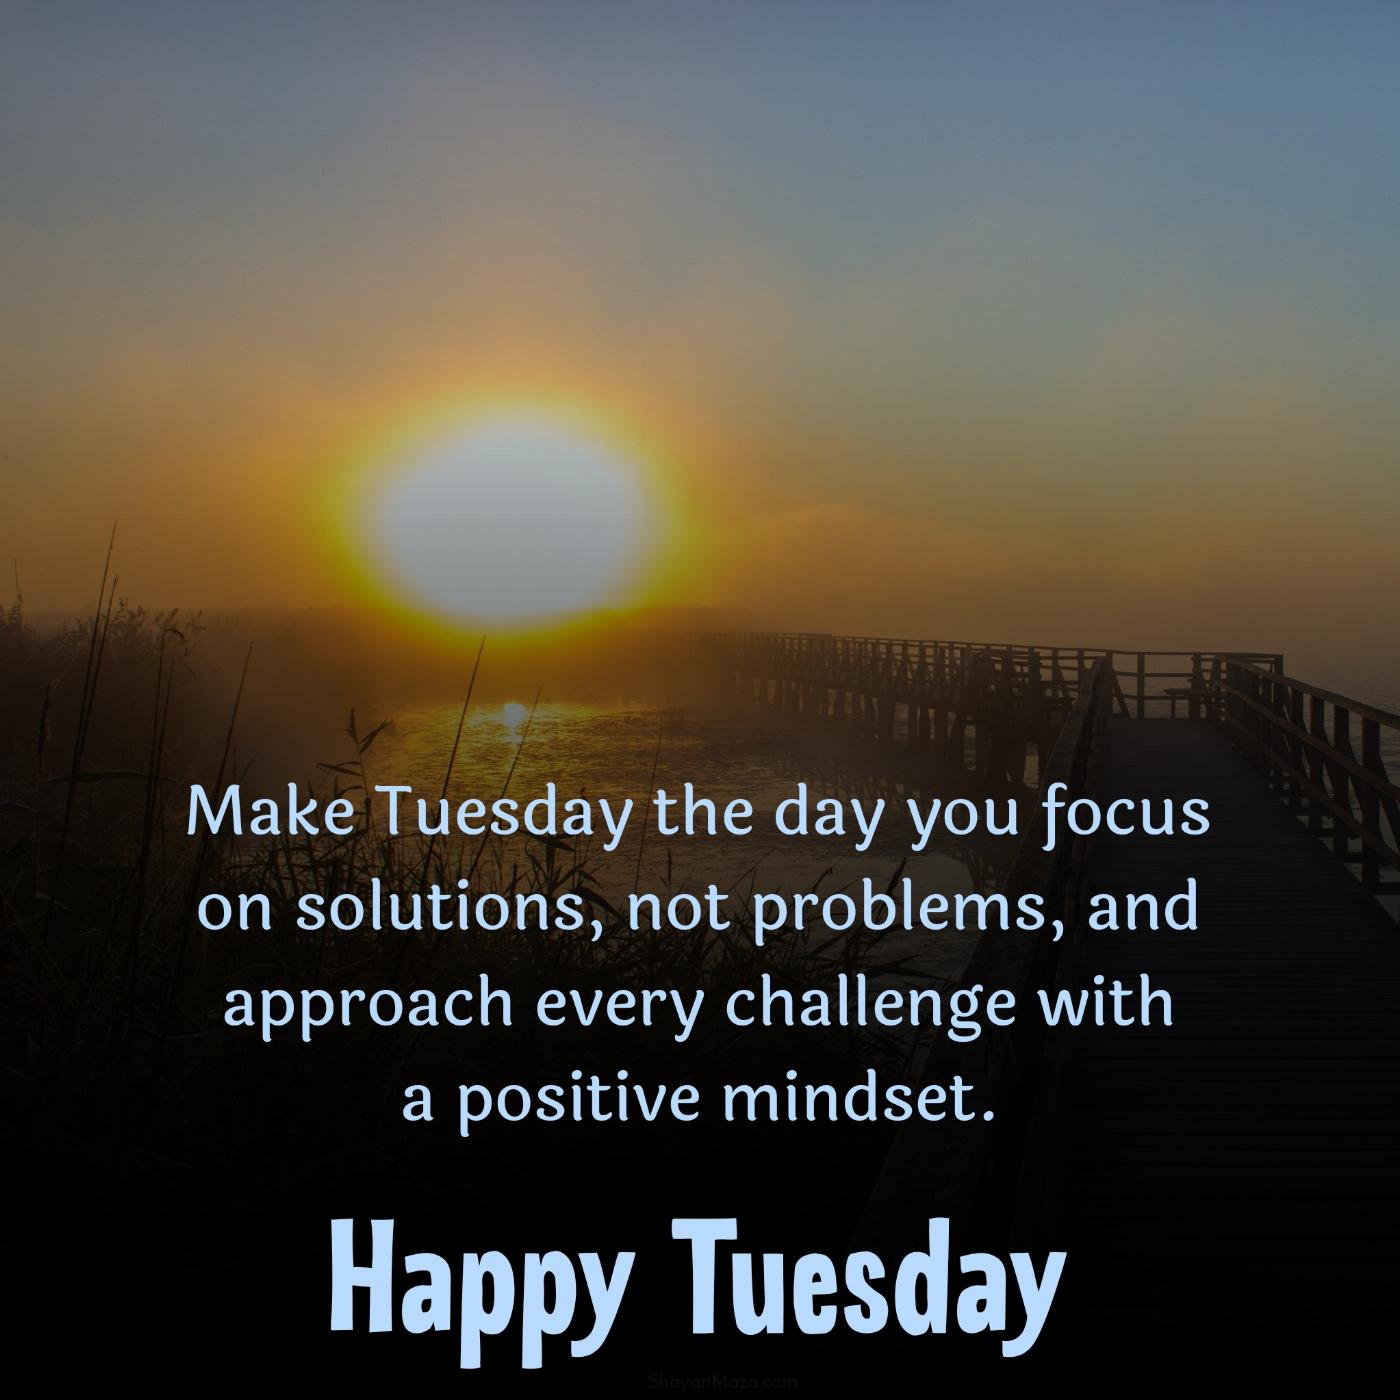 Make Tuesday the day you focus on solutions not problems